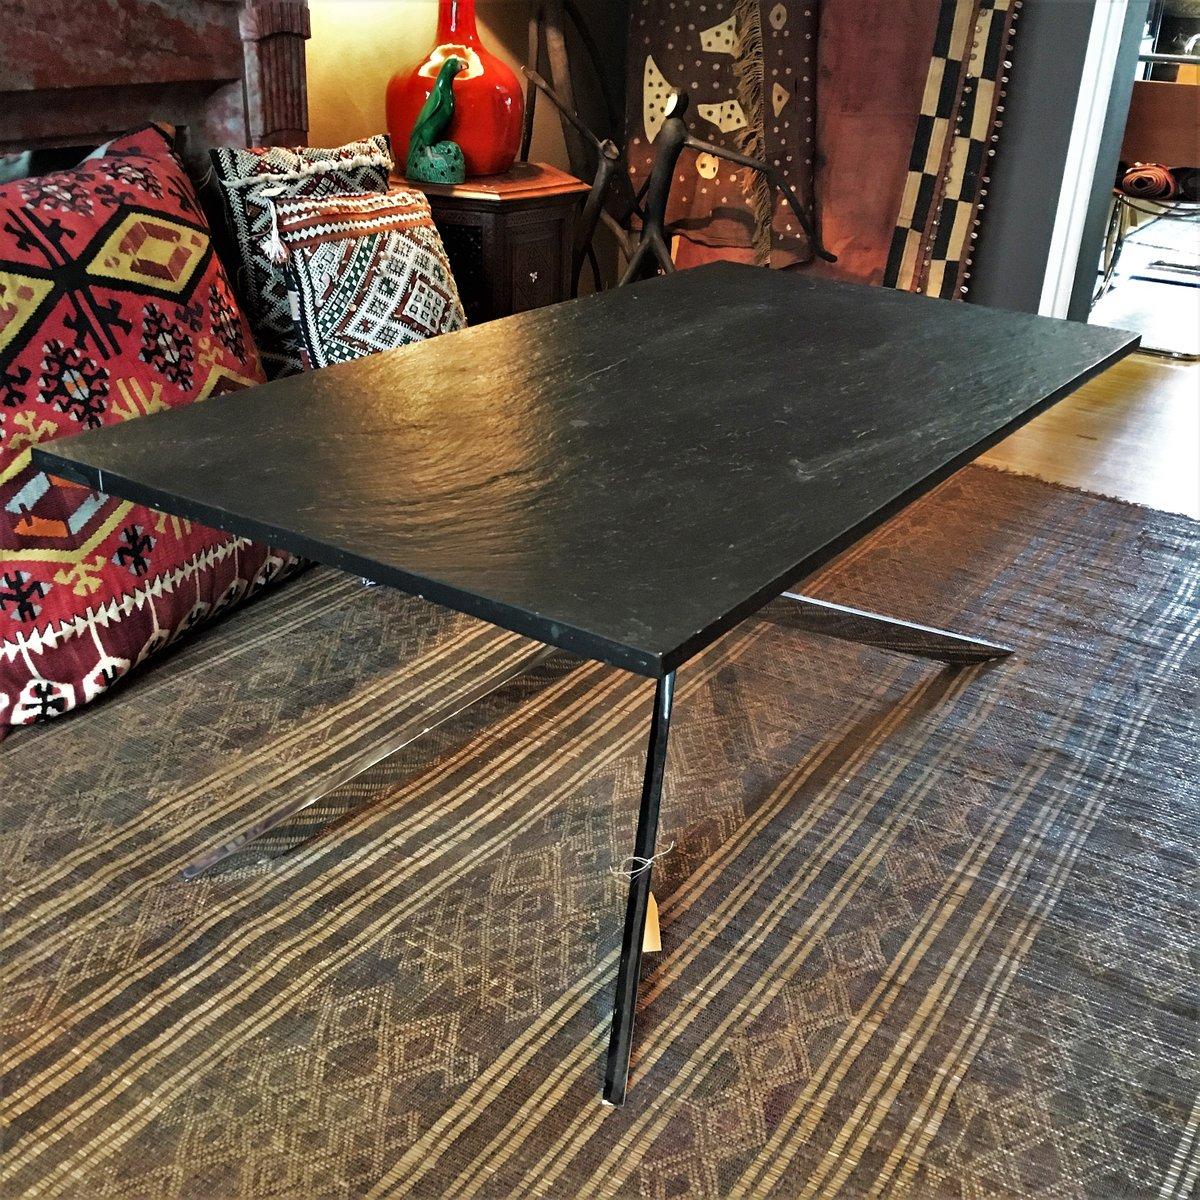 Heavy slate Italian design table.  With a base of polished chrome and a granite top this piece is timeless, elegant & modern all in one! 